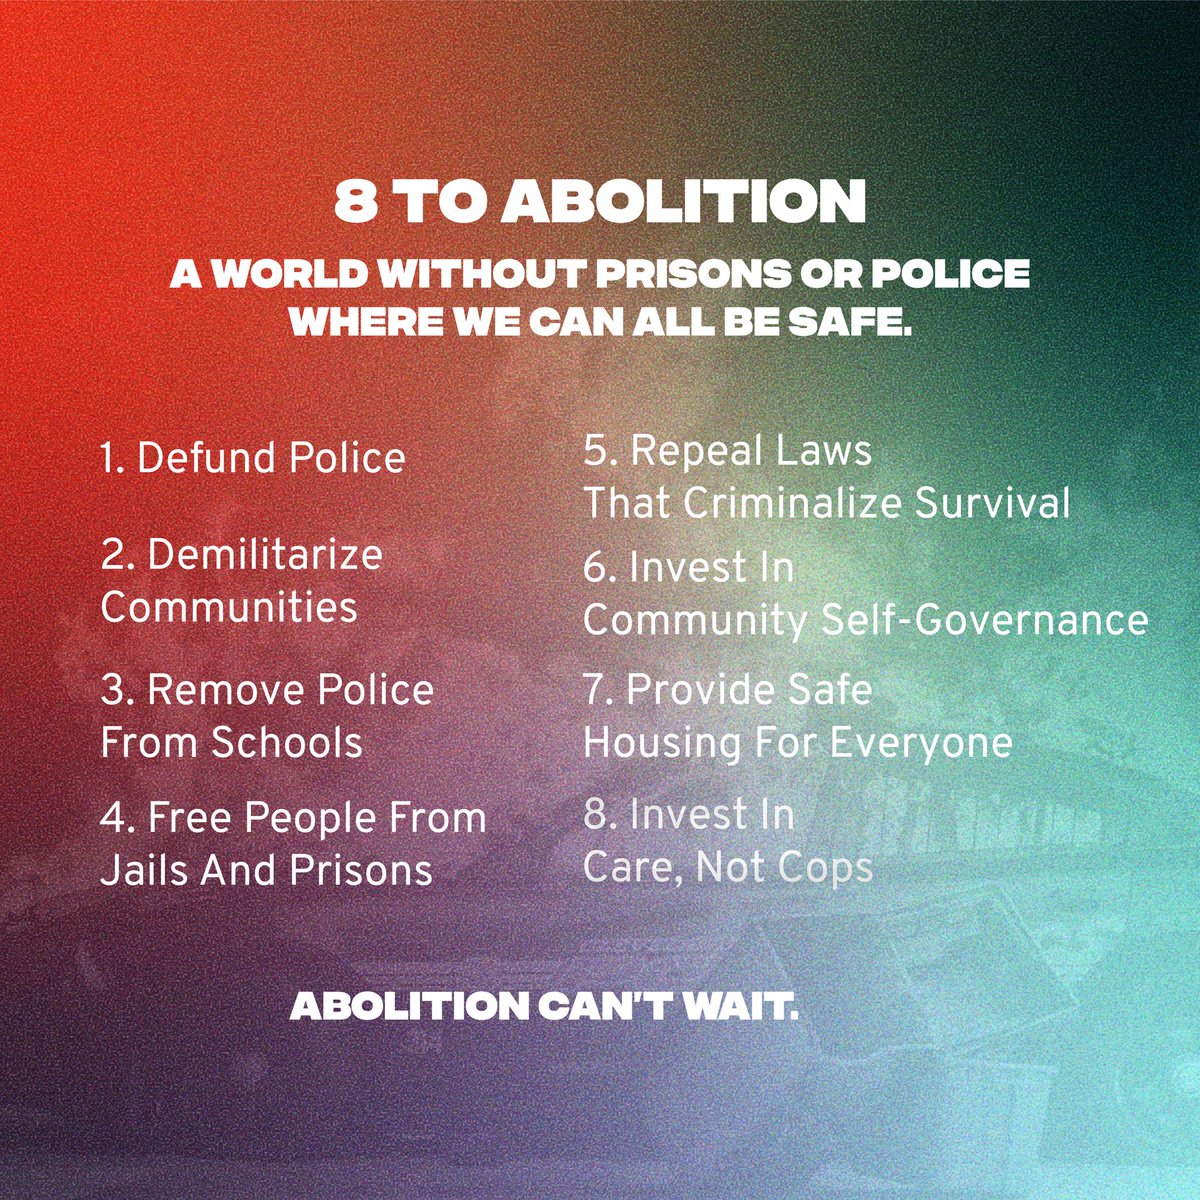 a crucial concept in this justice work is "divest/invest": abolition as a strategy (including the call to  #DefundThePolice) asks us to shift resources from harm-creating structures to liberatory and harm-reducing projects (cf.  #8ToAbolition)